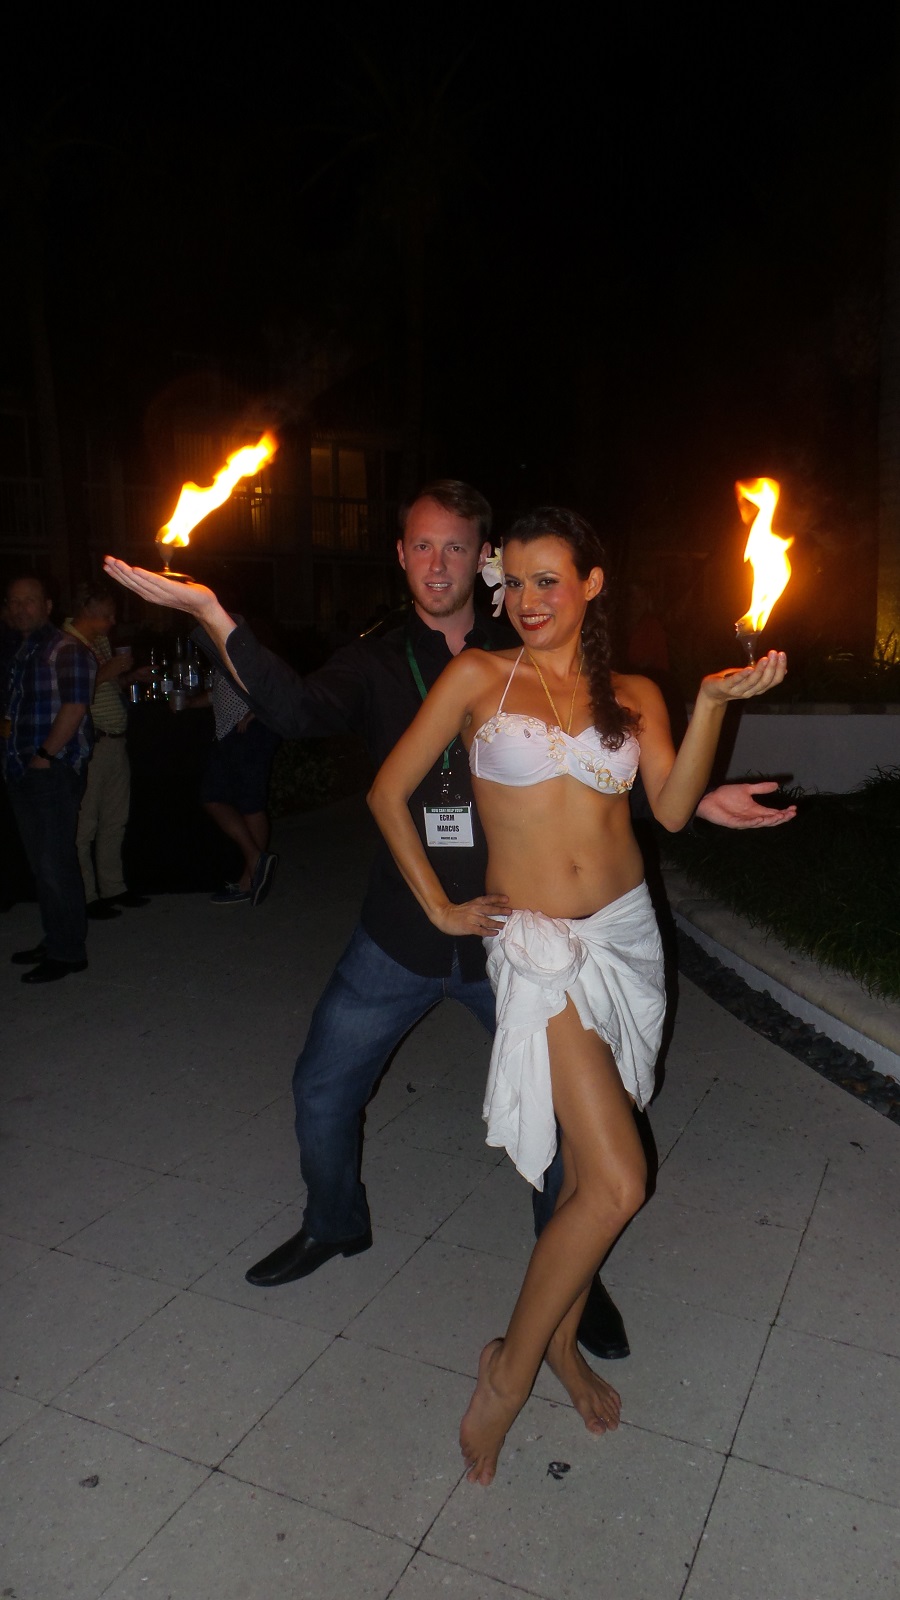 ECRM's Marcus Allen with a fire dancer who performed during dinner